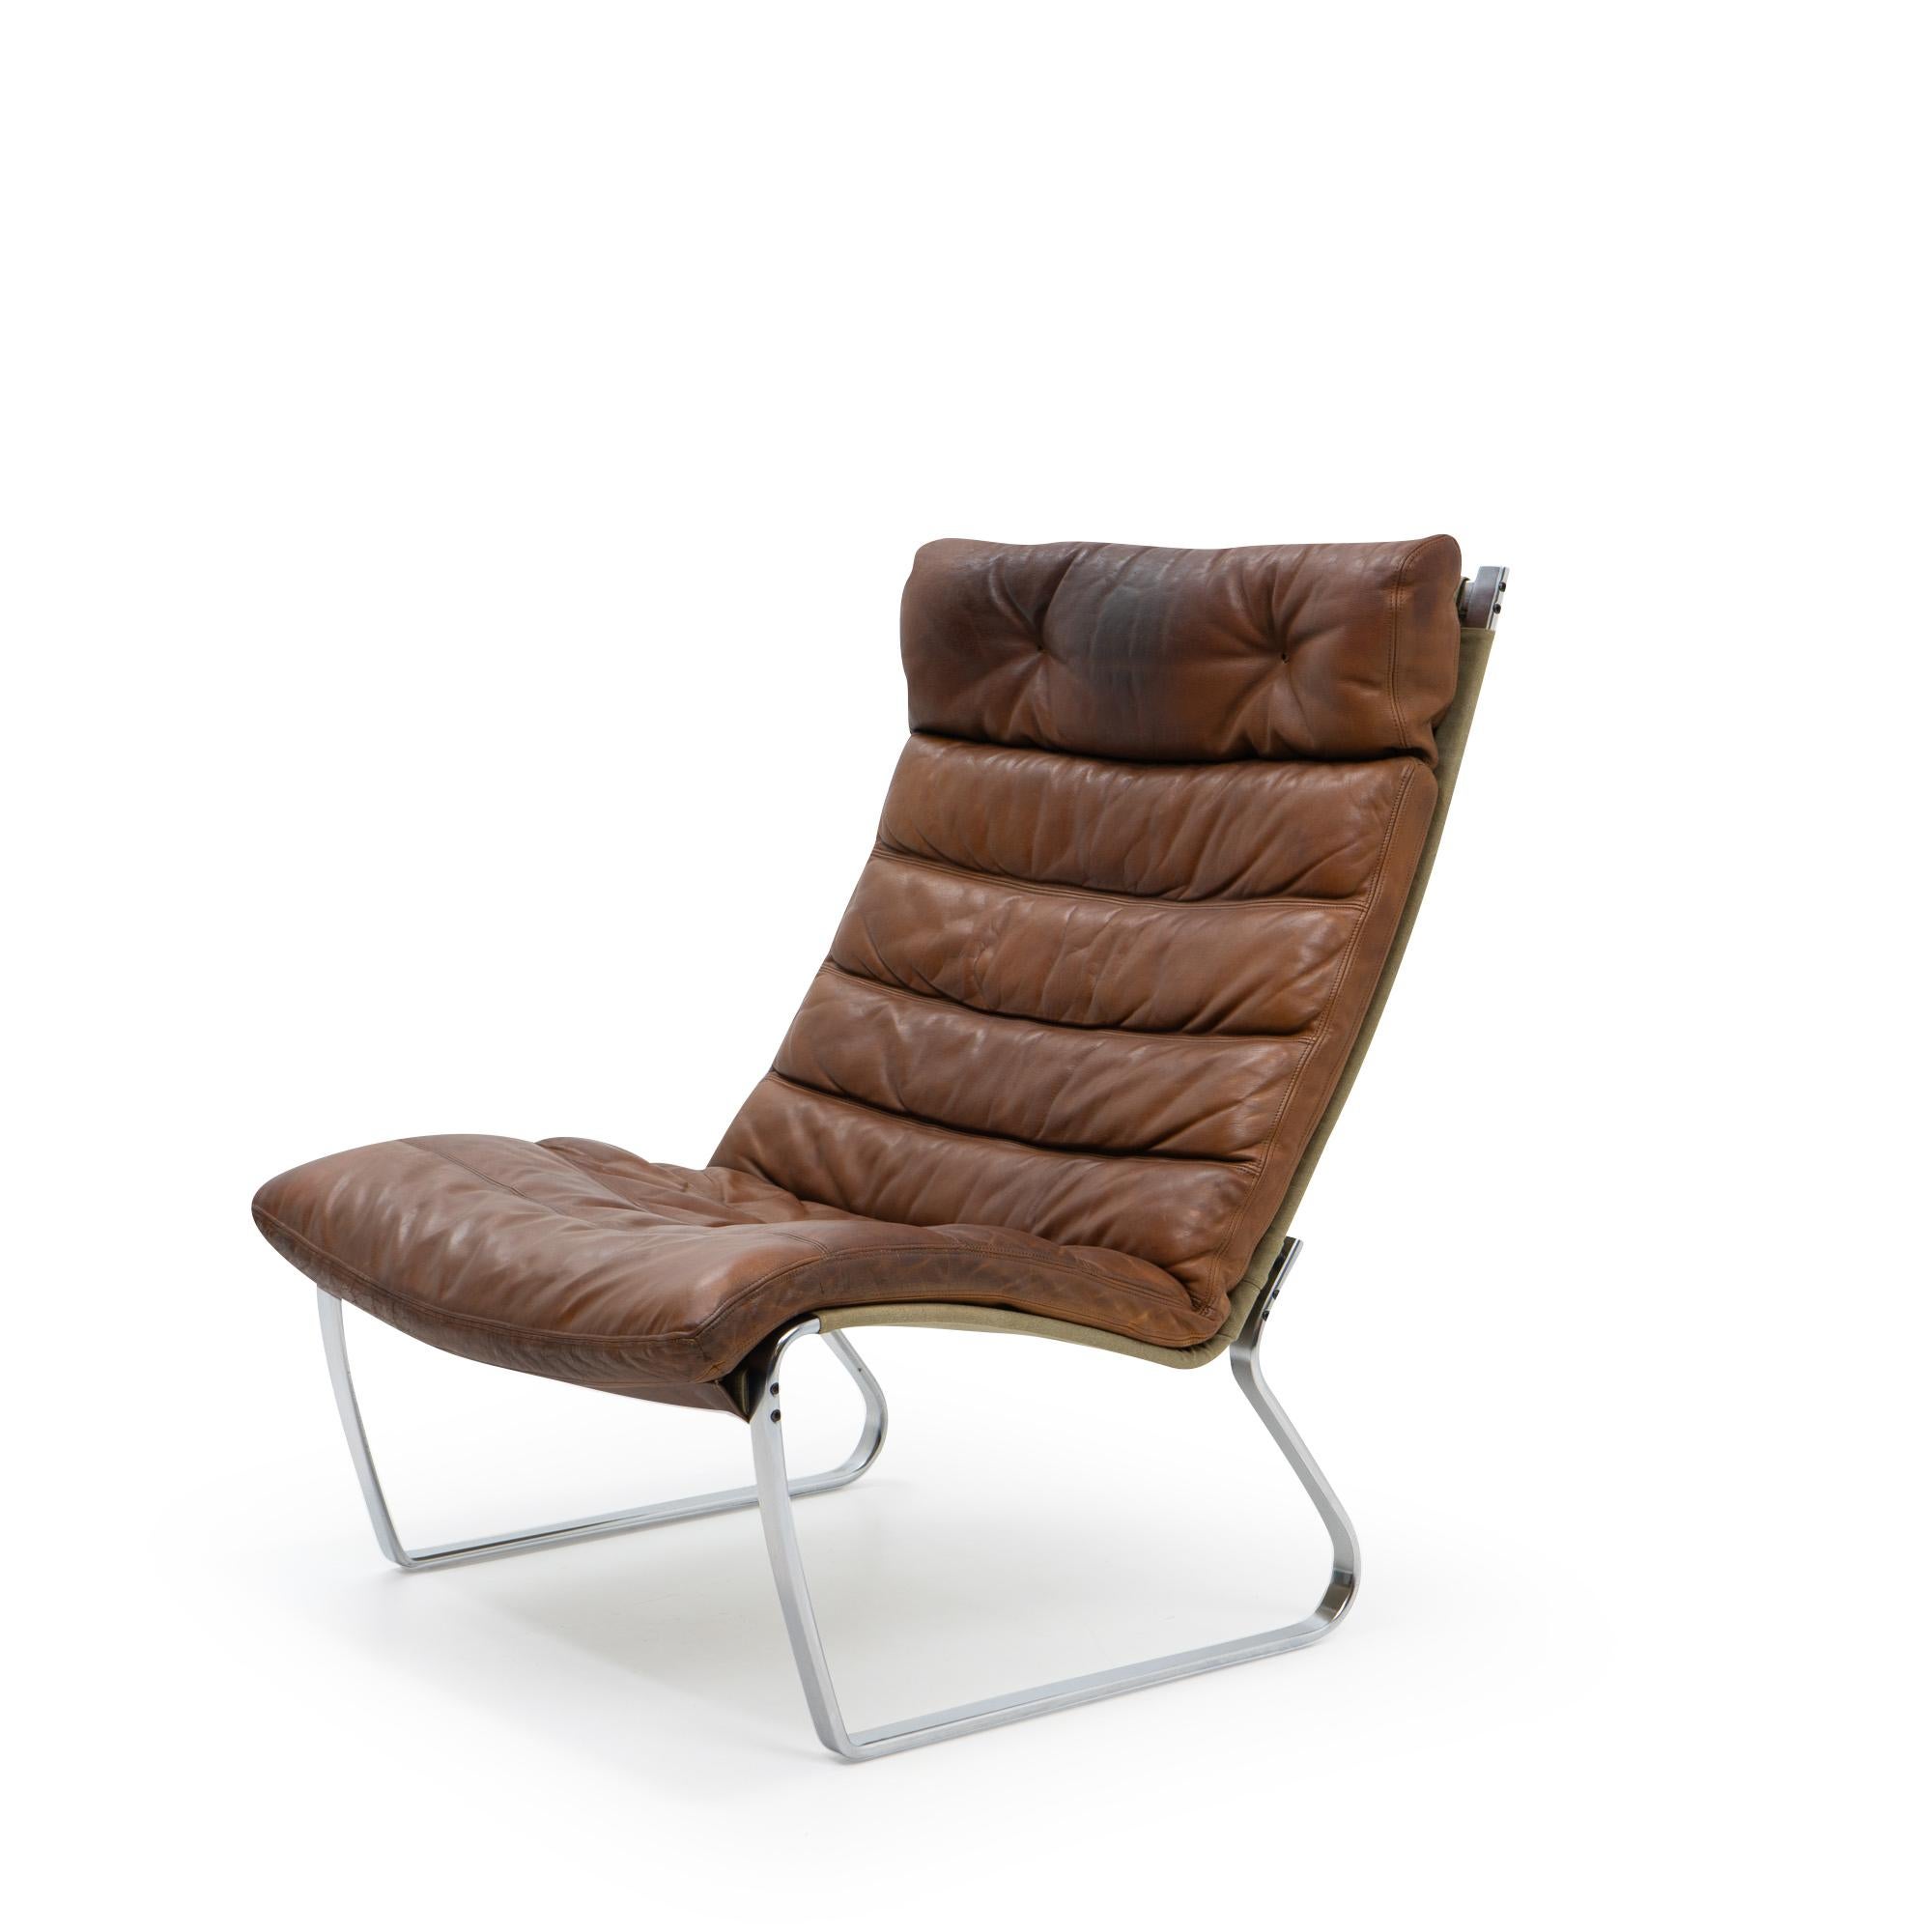 JK 720 Lounge Chair by Jørgen Kastholm for Kill International: 

The JK 720 Chair was only produced for a short time during the 1970s by Alfred Kill’s company; it features a brushed steel frame, canvas support and a beautifully patinated leather